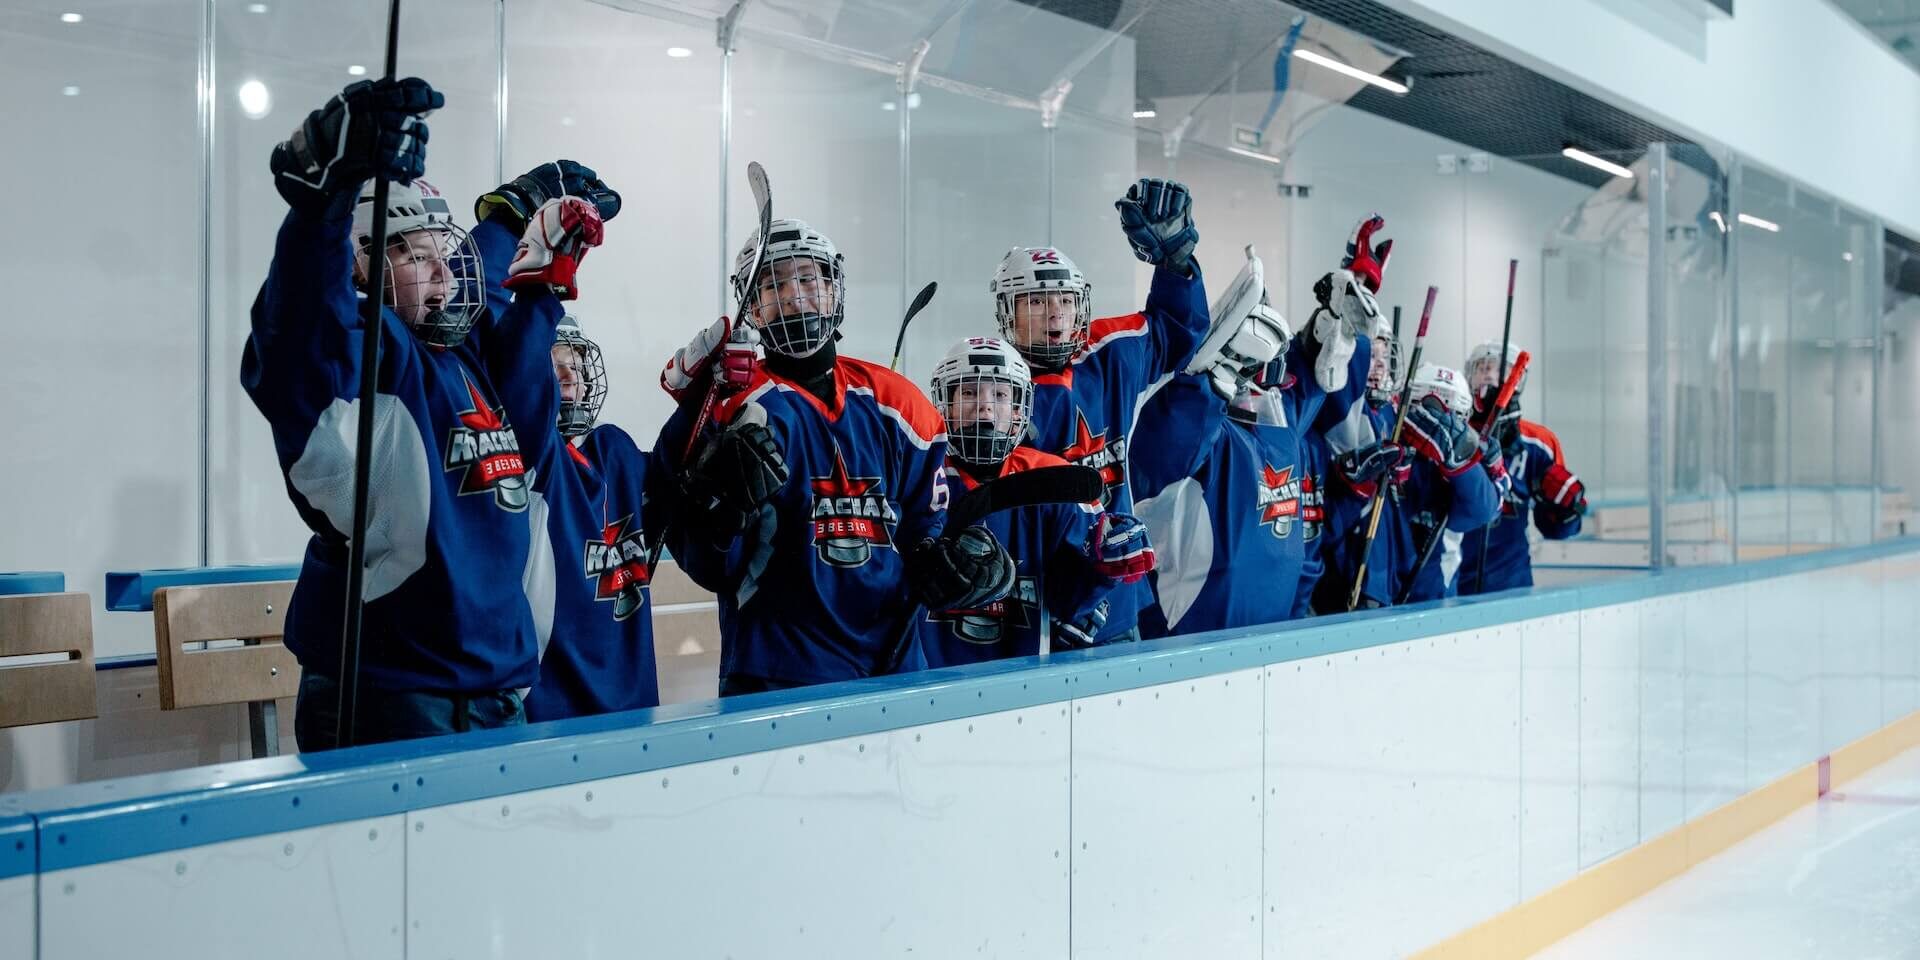 A group of men in blue and white hockey uniforms.